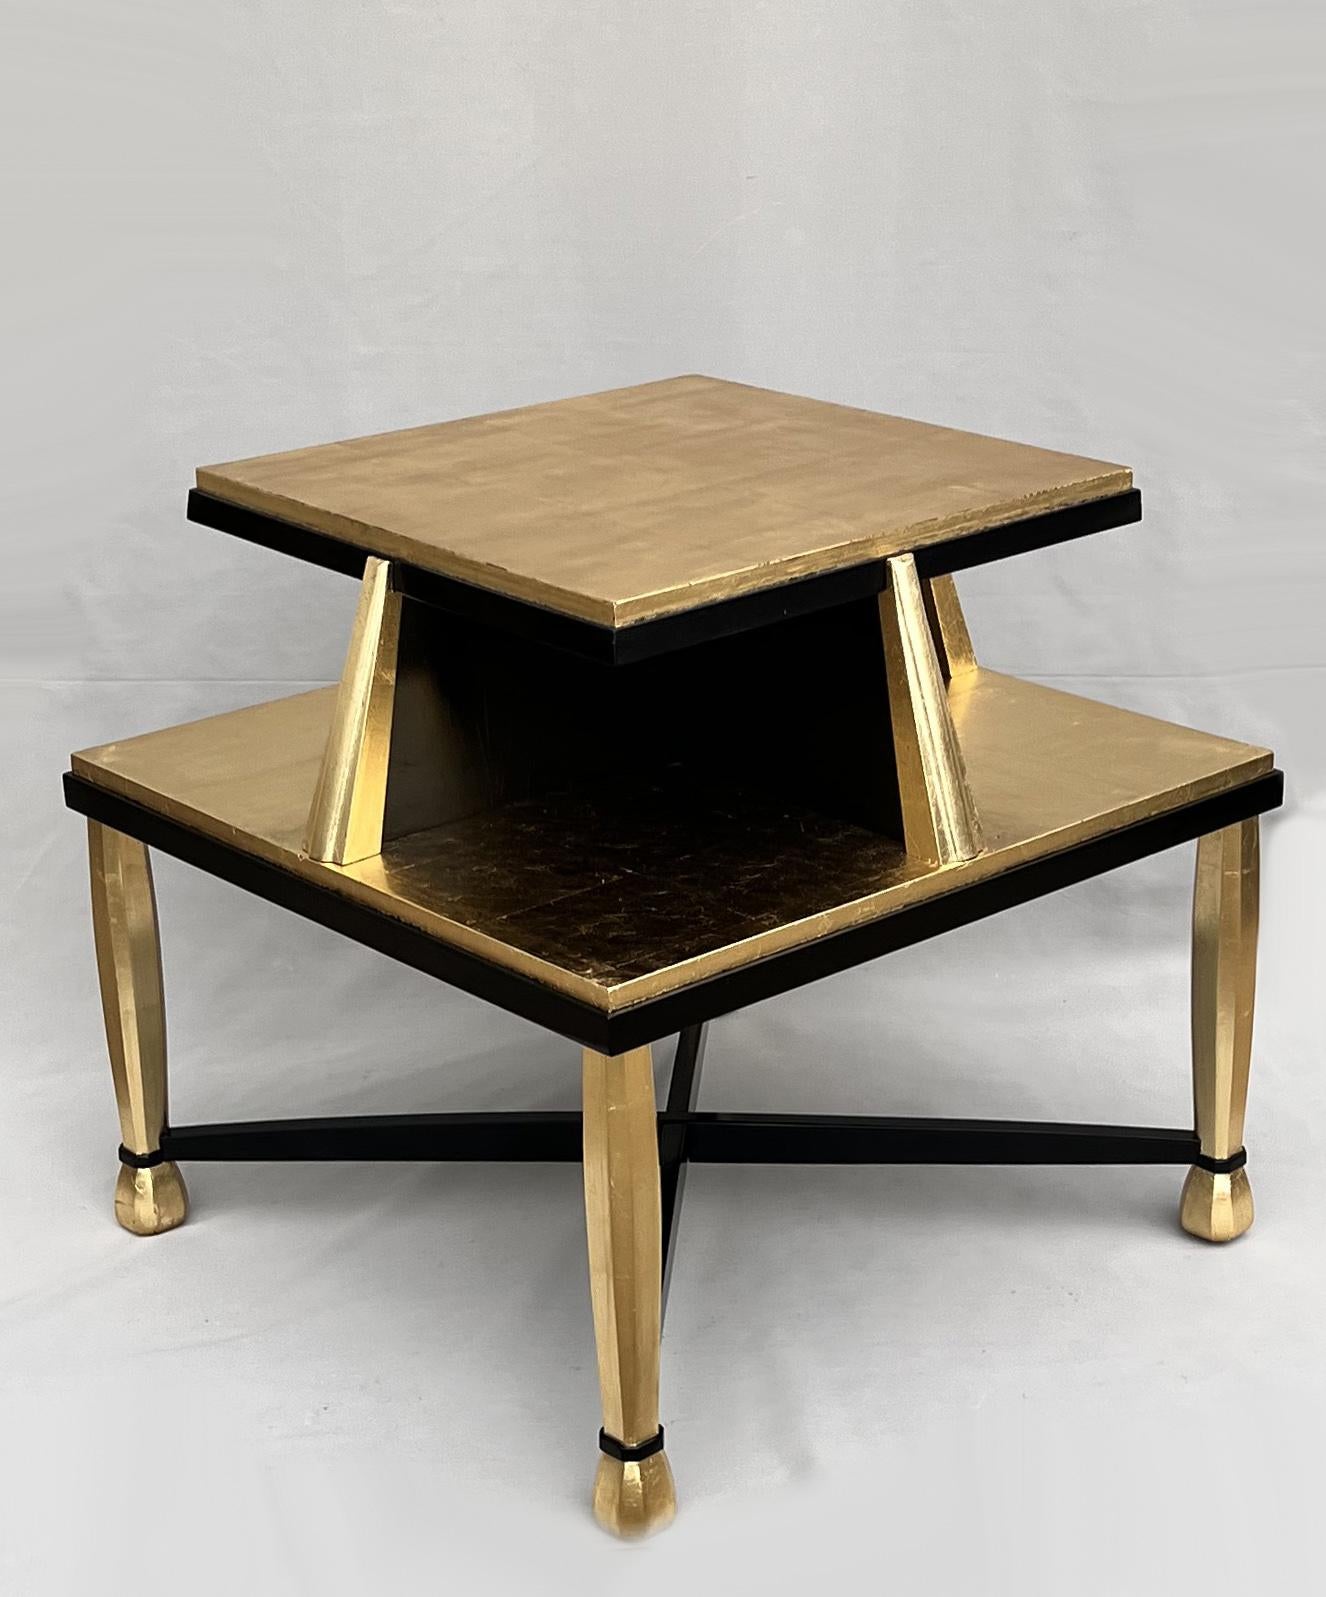 Gold Leaf Art Deco Coffee Table in Giltwood and Black Lacquer, 1930s For Sale